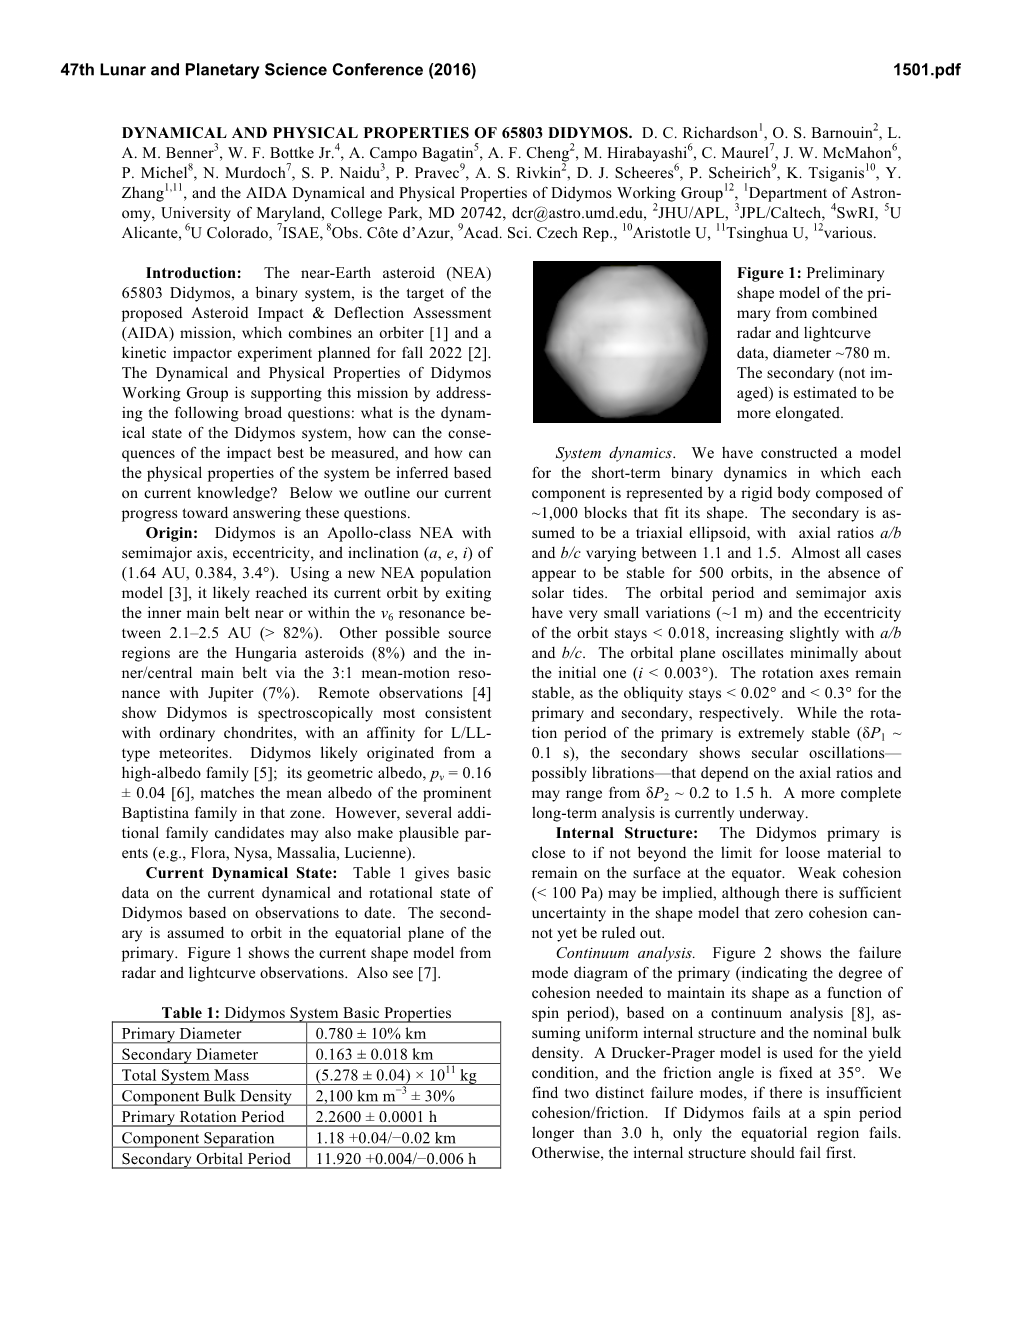 Dynamical and Physical Properties of 65803 Didymos